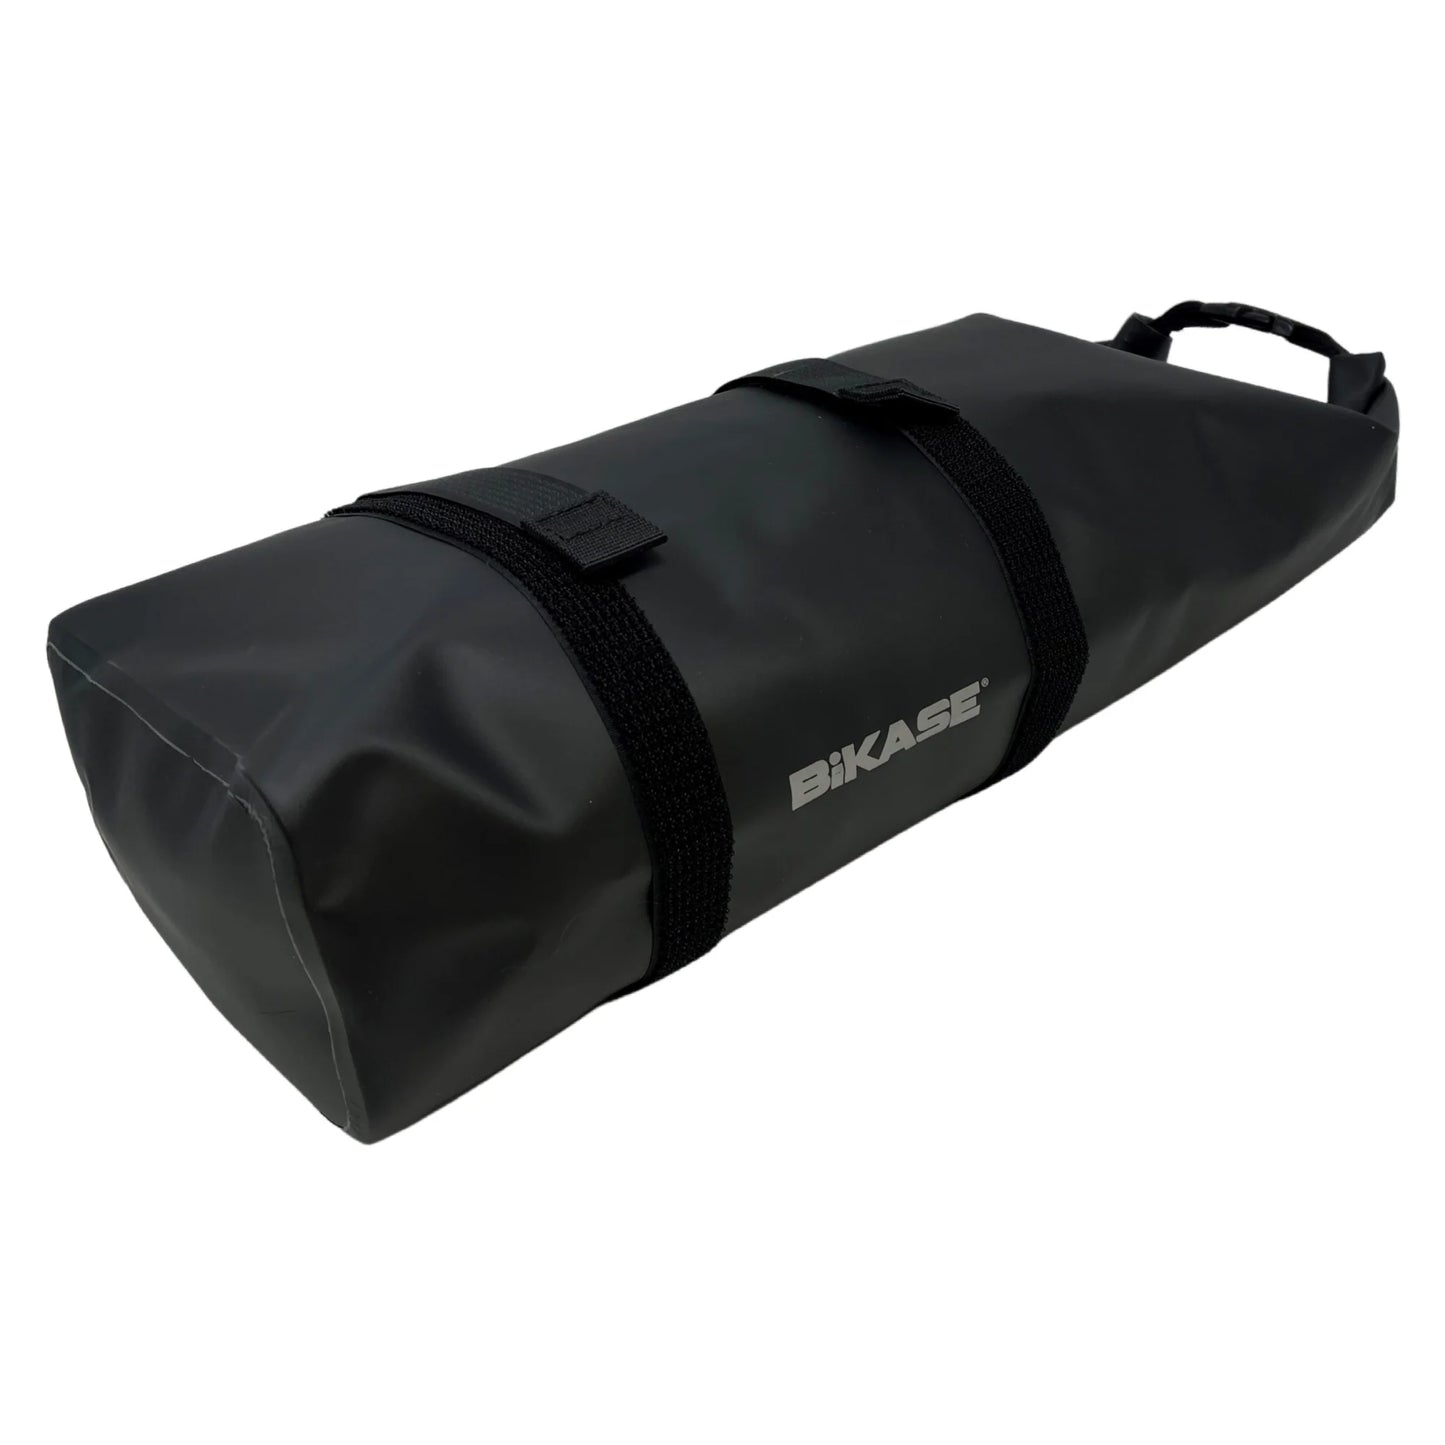 Ebike Battery Bag - Waterproof and flame resistant (Size Large)